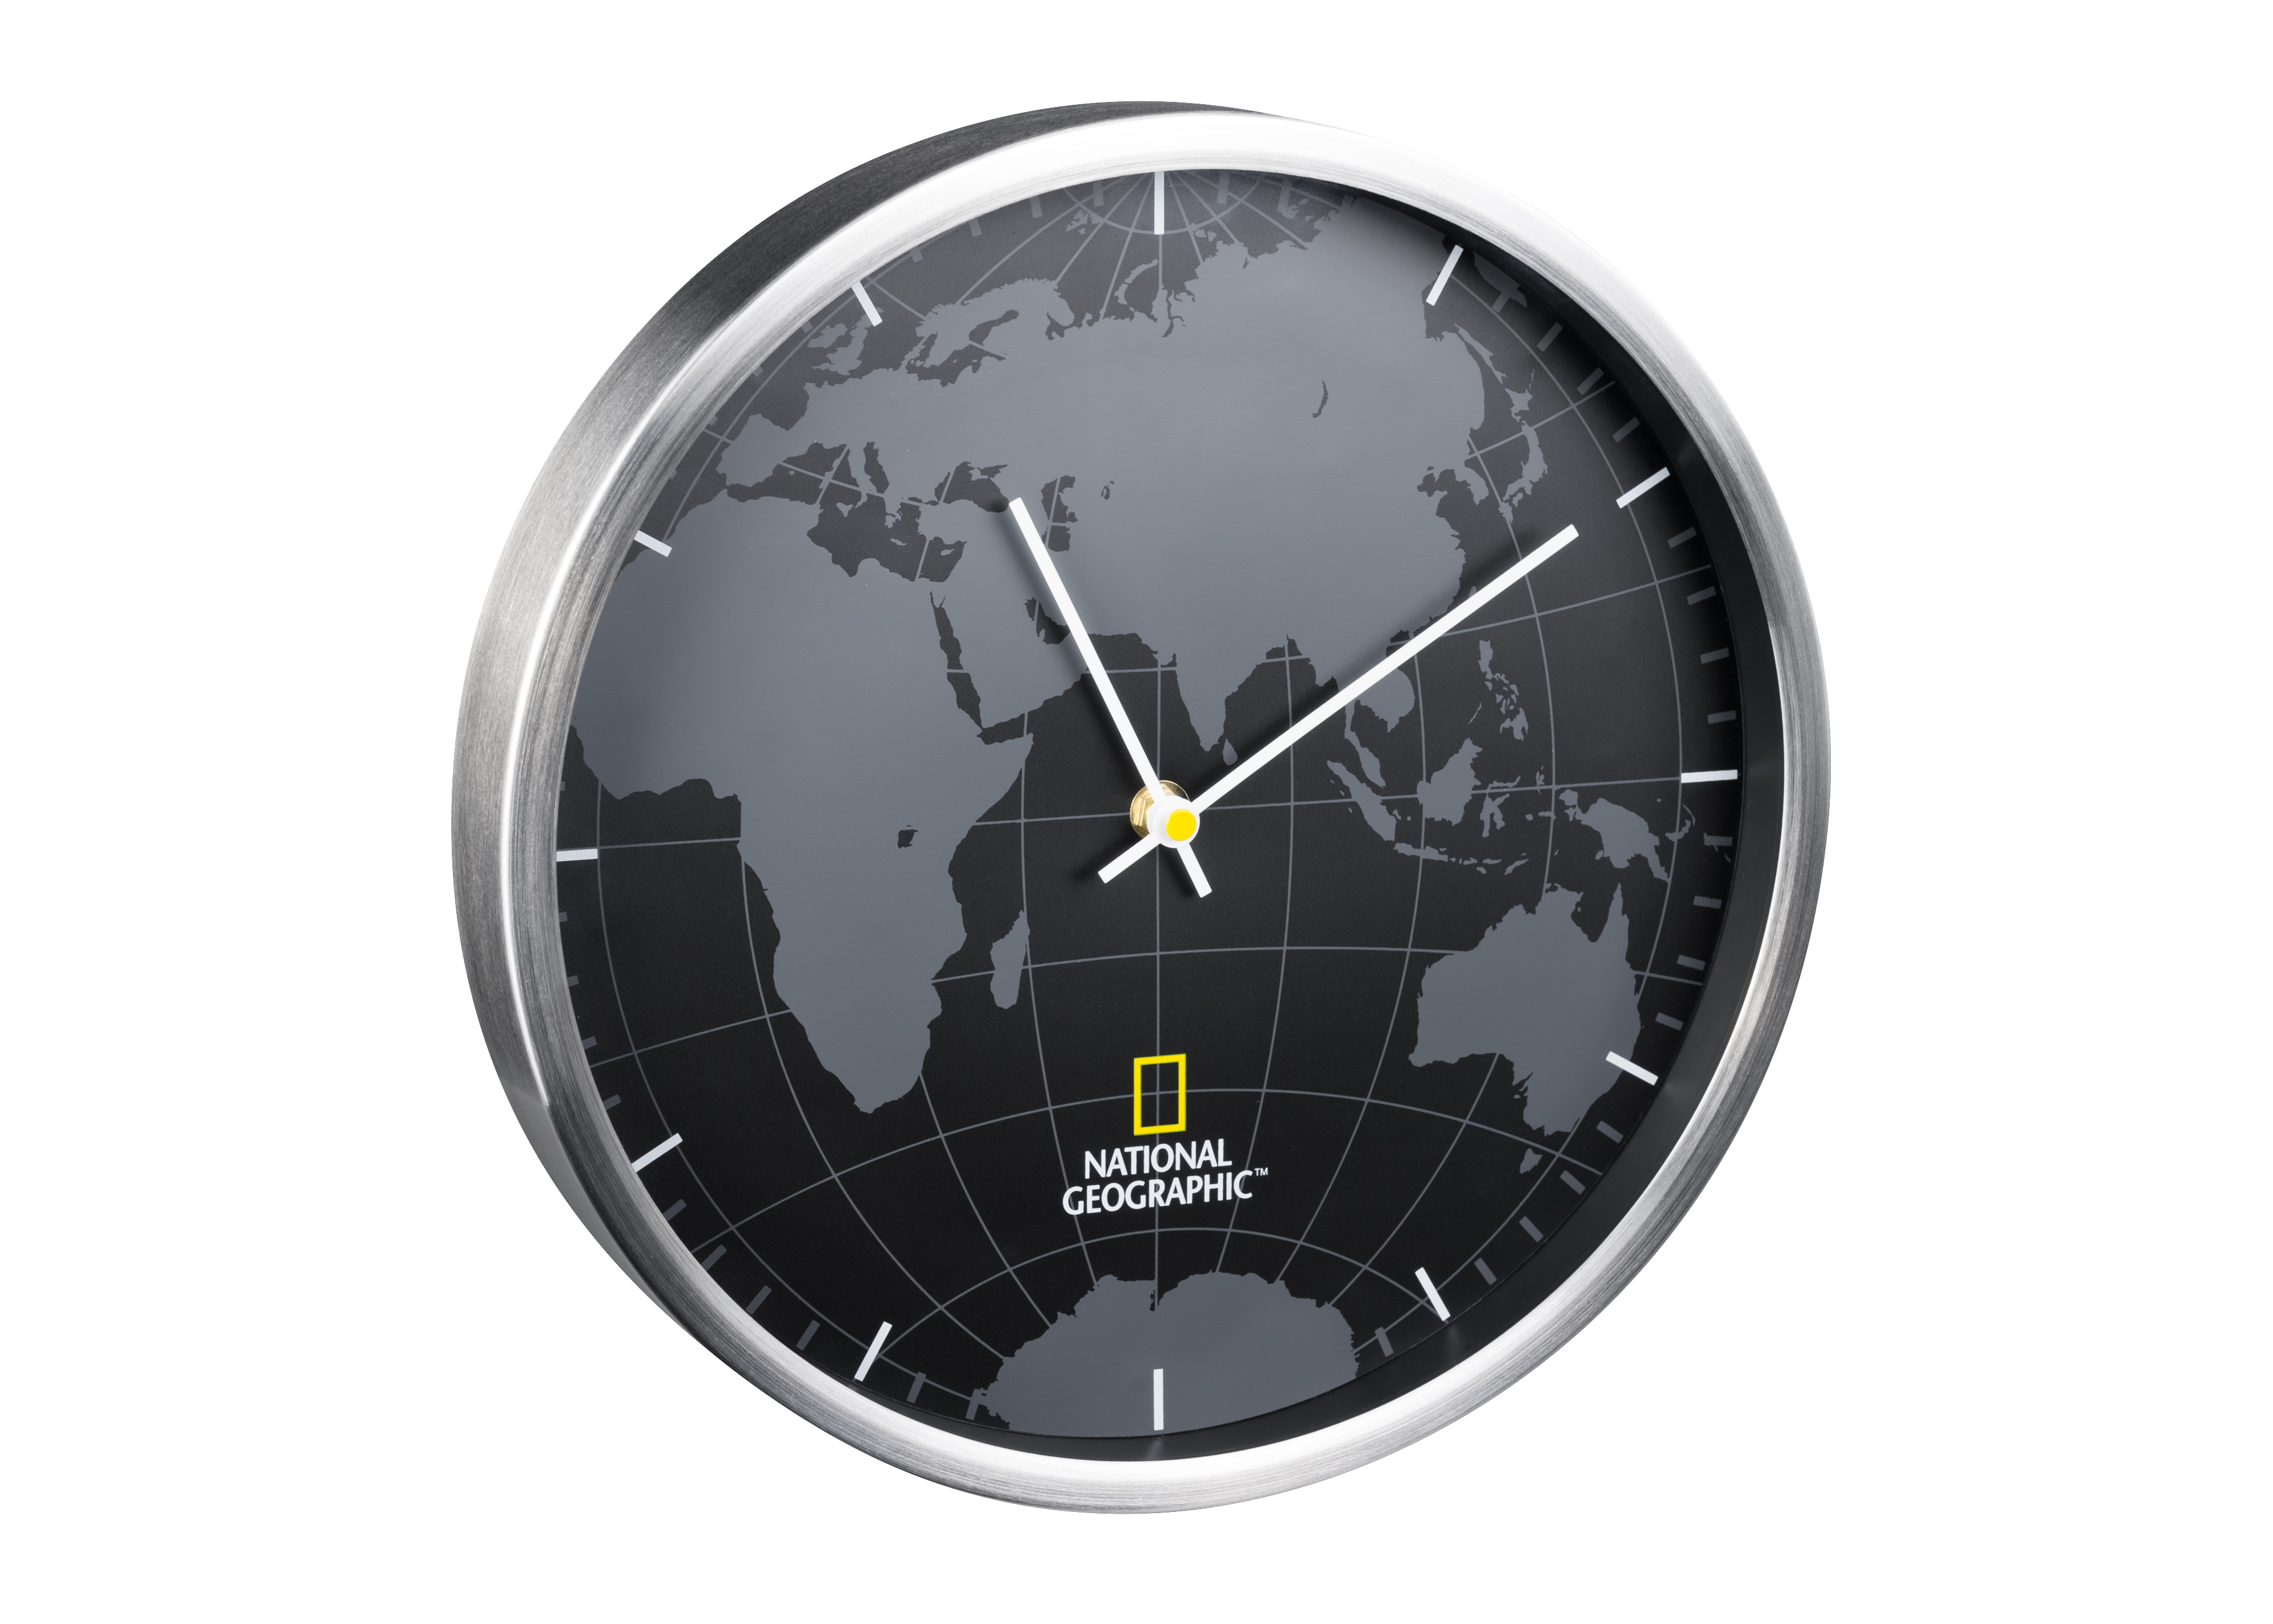 NATIONAL GEOGRAPHIC 30 cm Clock